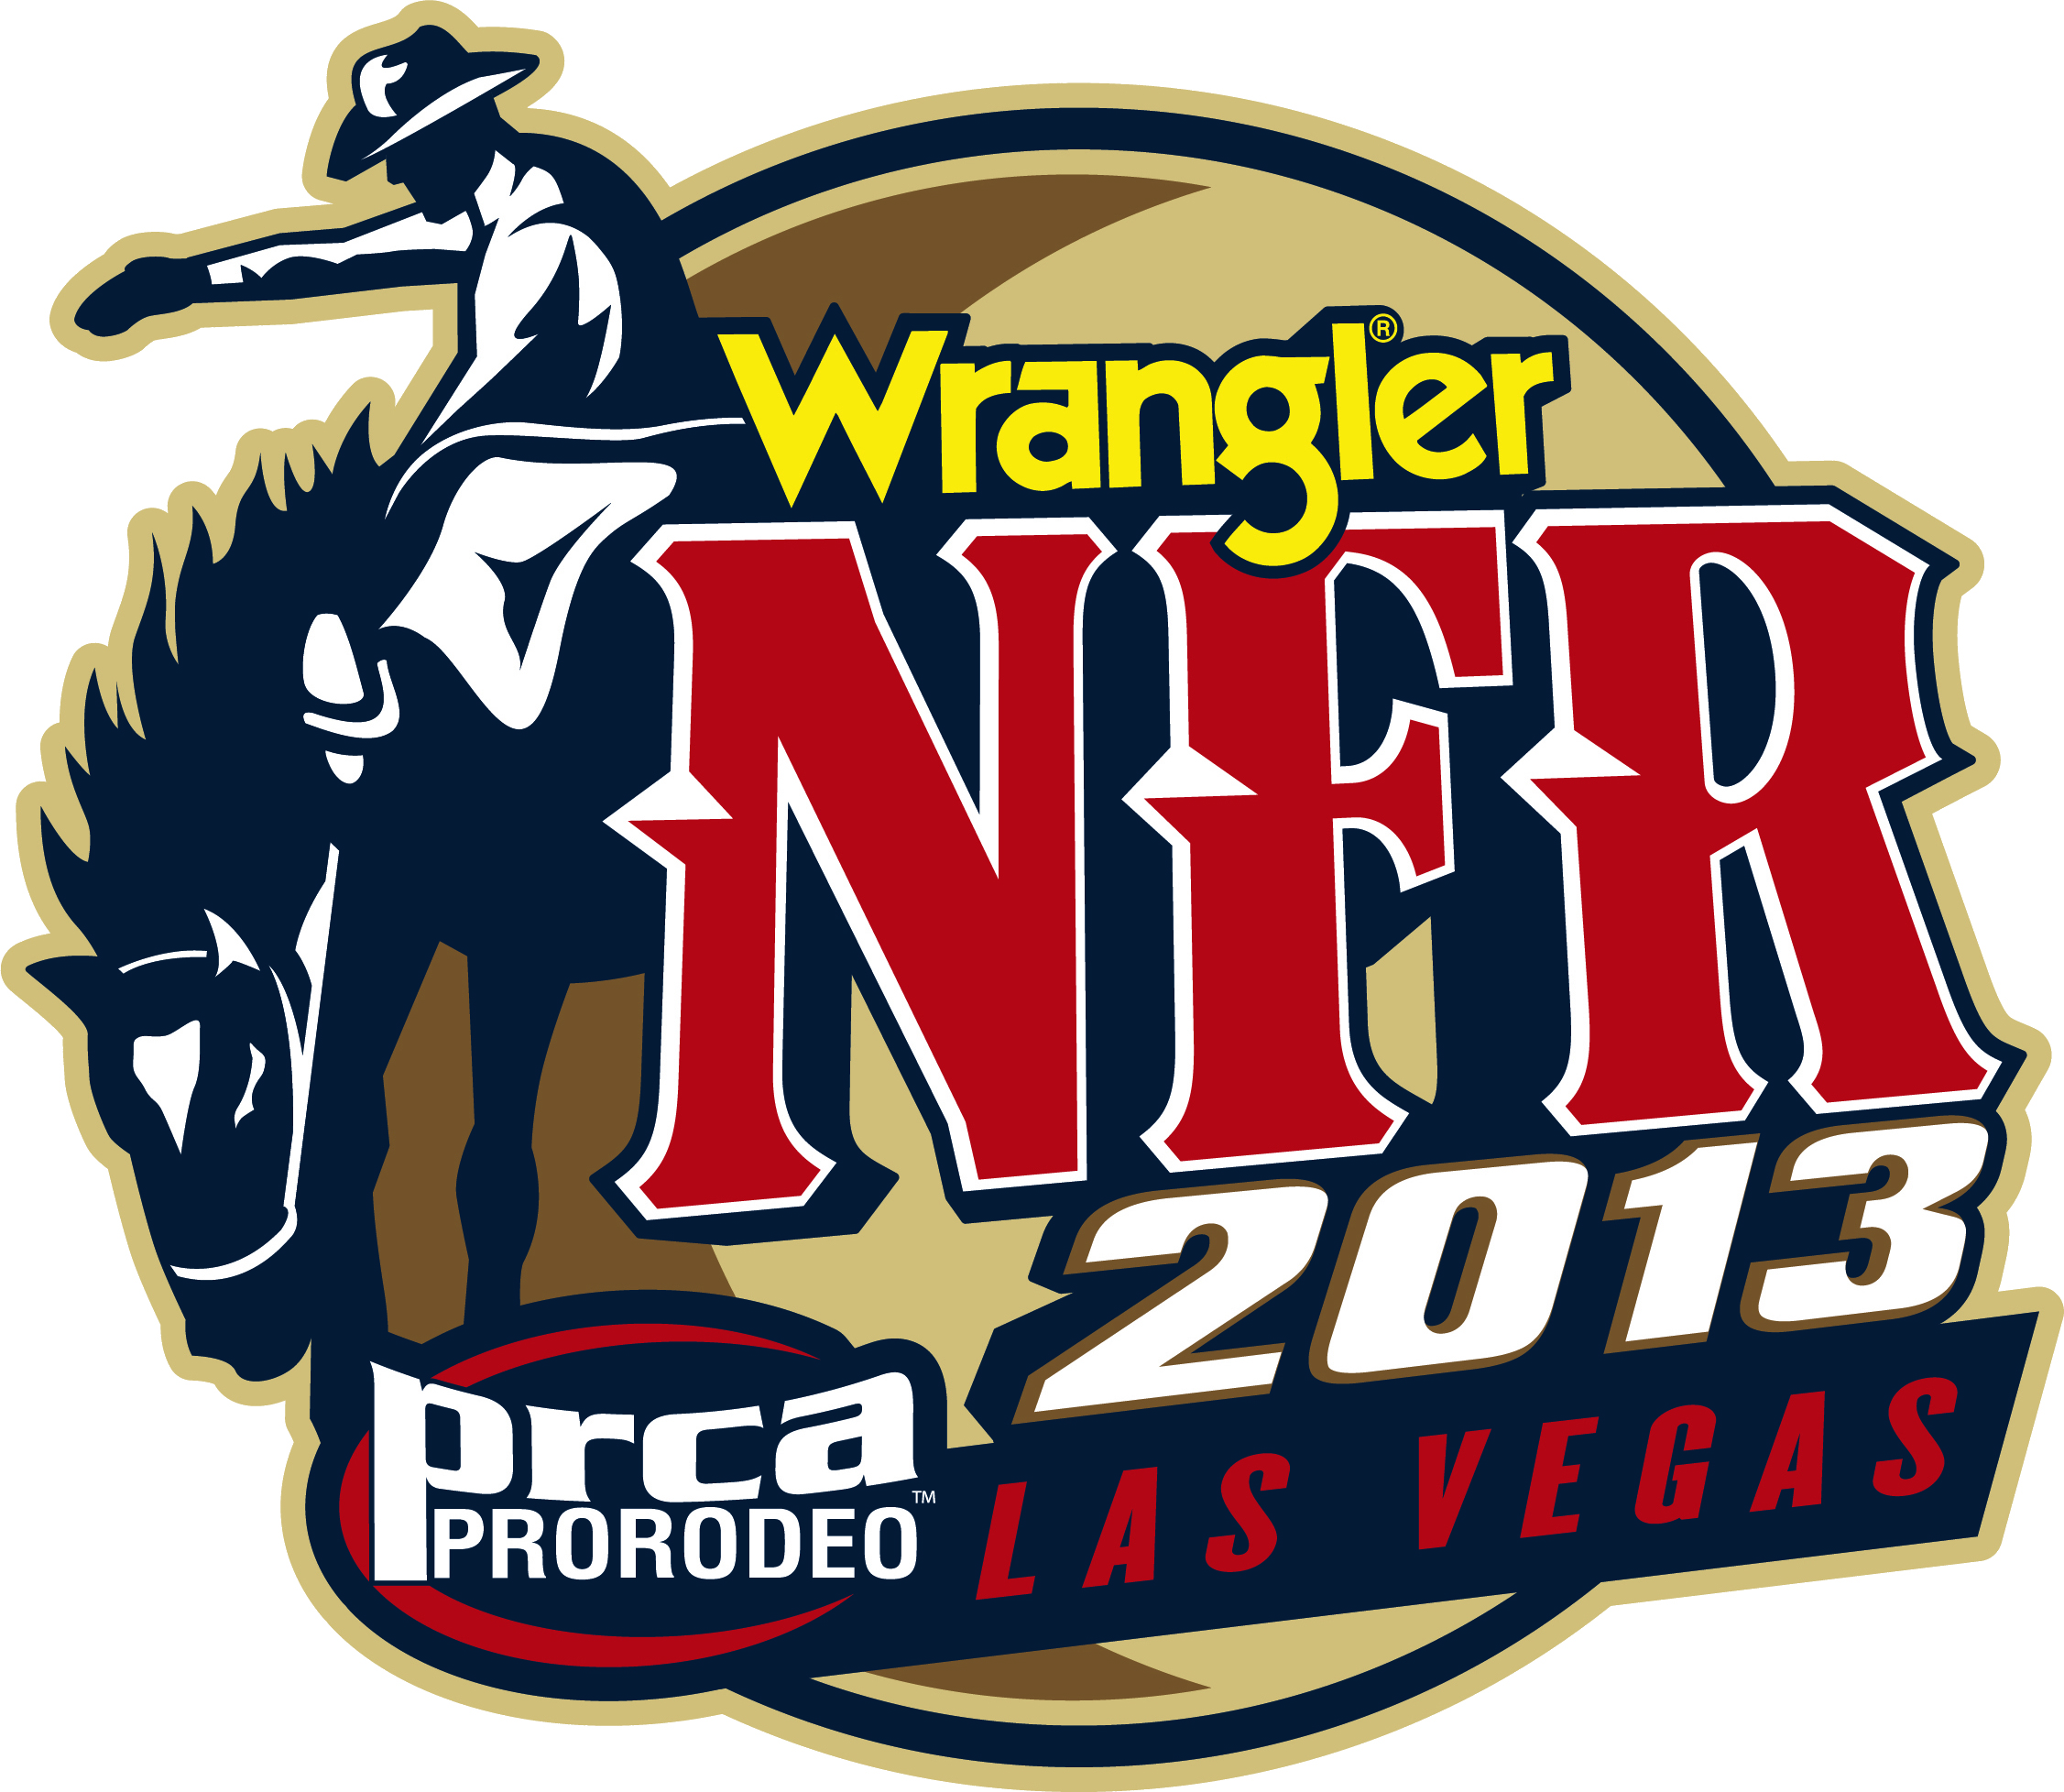 Las Vegas Events and PrimeSport Launch Official 2013 Wrangler National